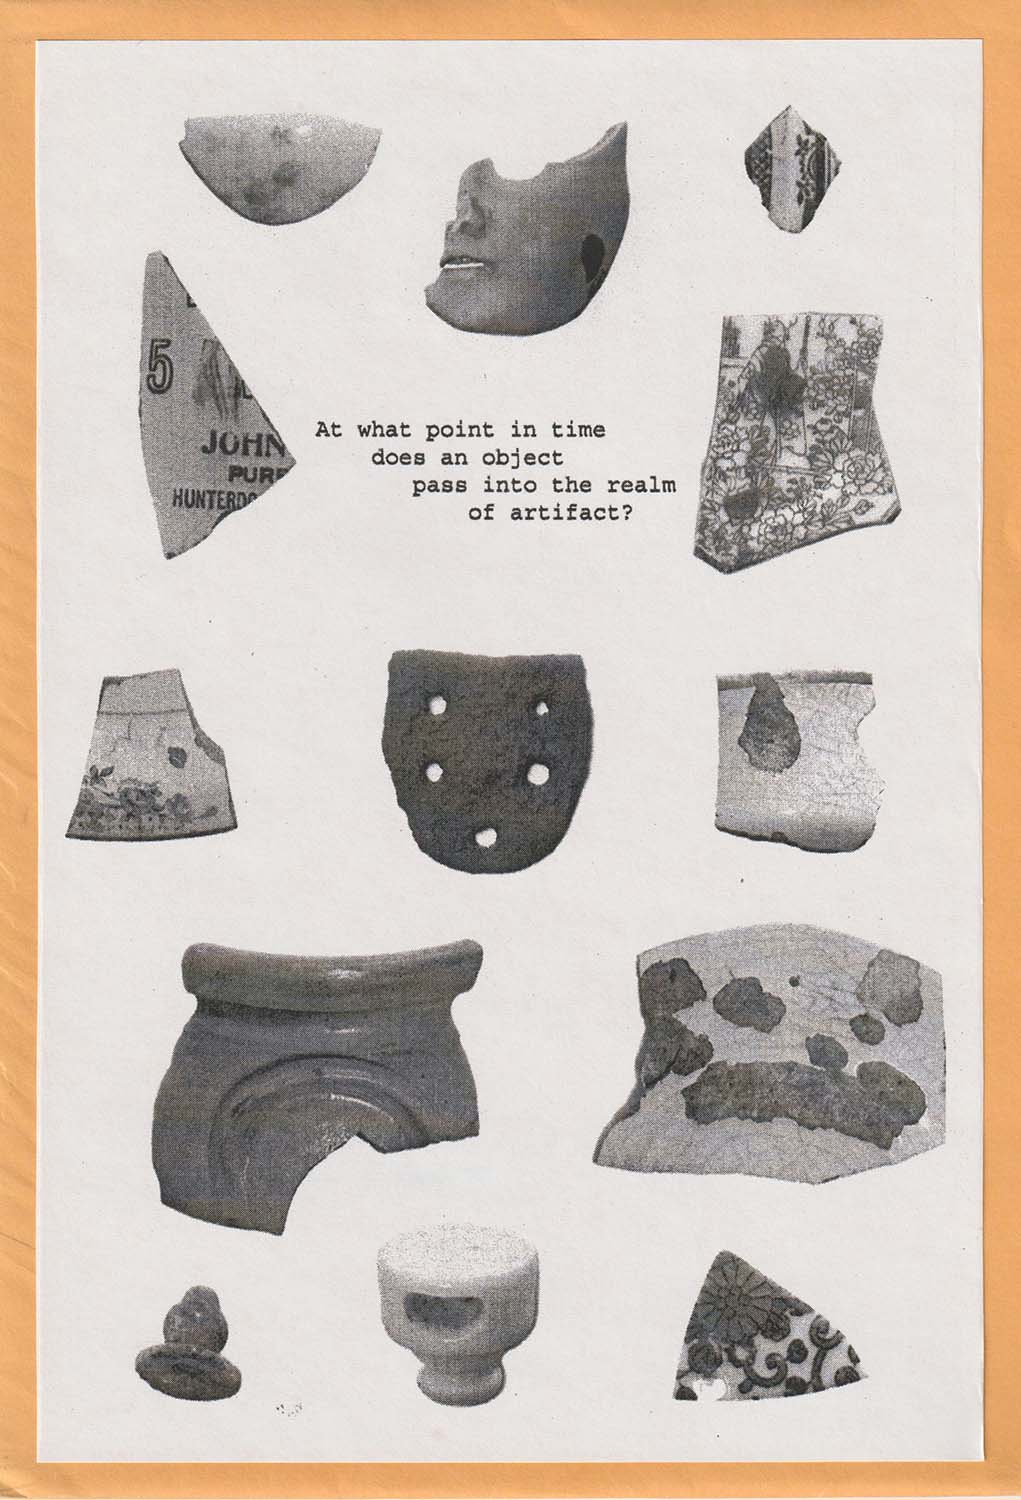 A page from Walking Inwood, 2011, an artist book featuring artifacts collected on walks in Inwood Hill Park.